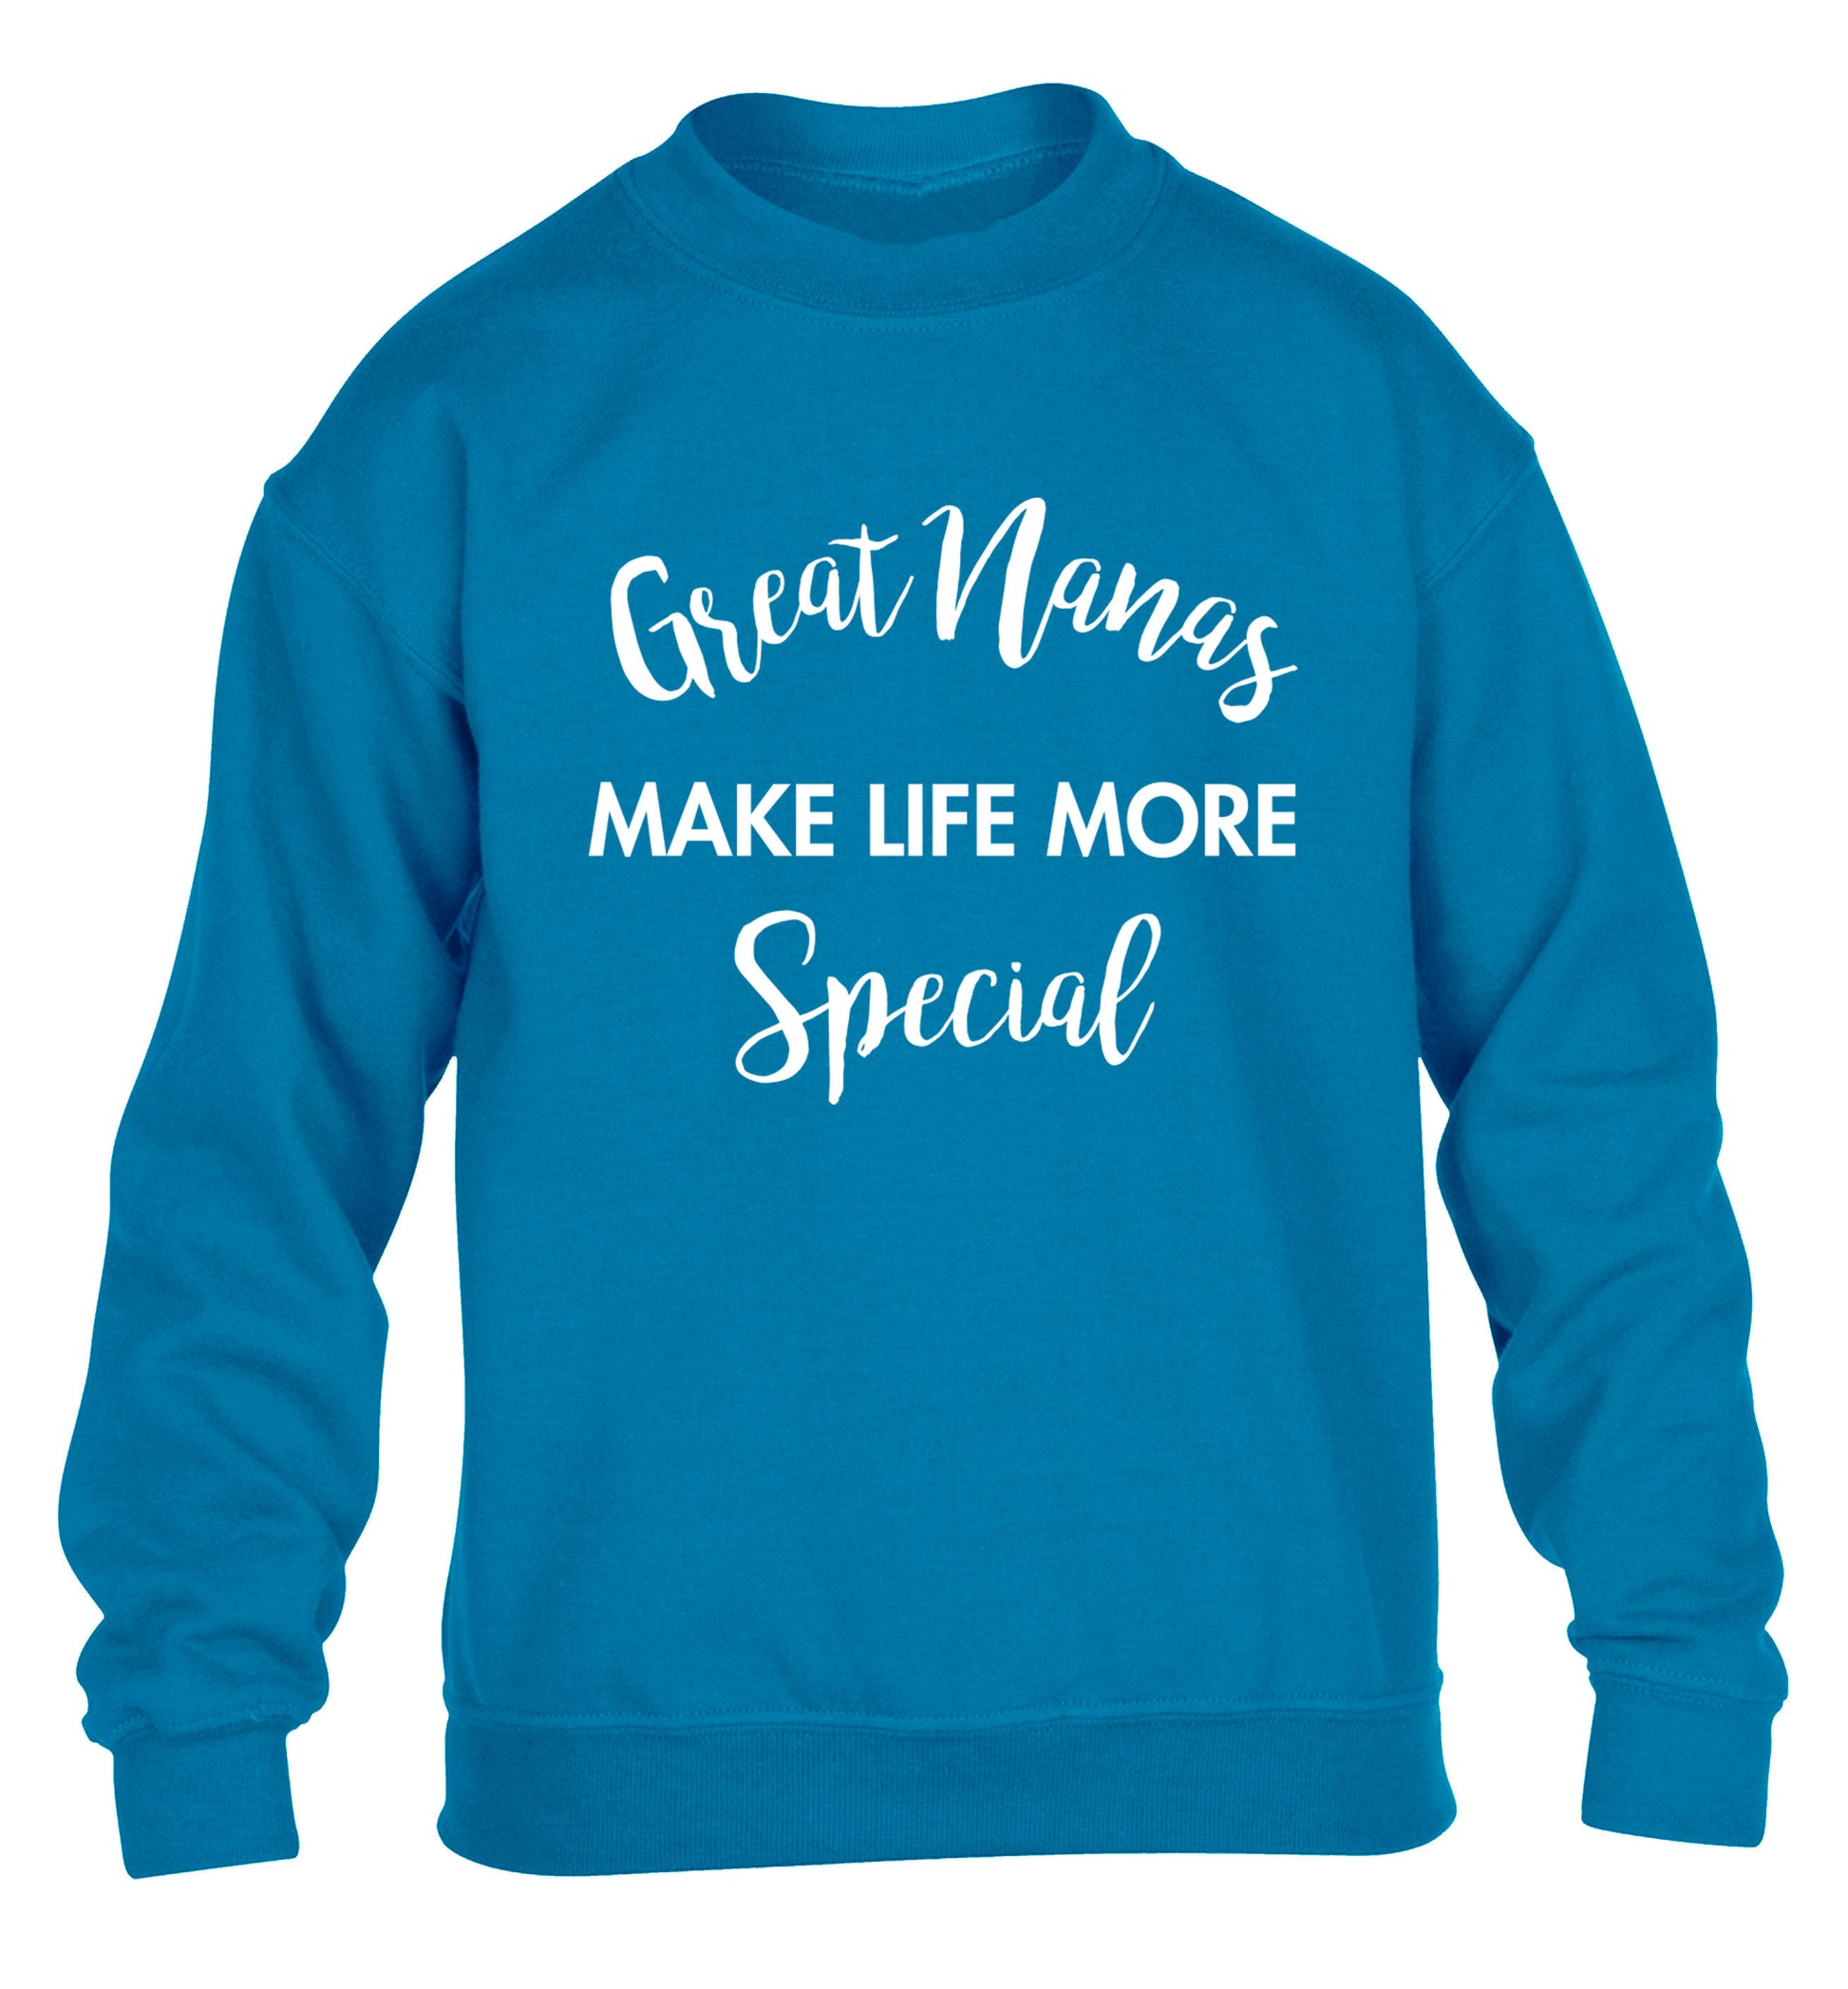 Great nanas make life more special children's blue sweater 12-14 Years